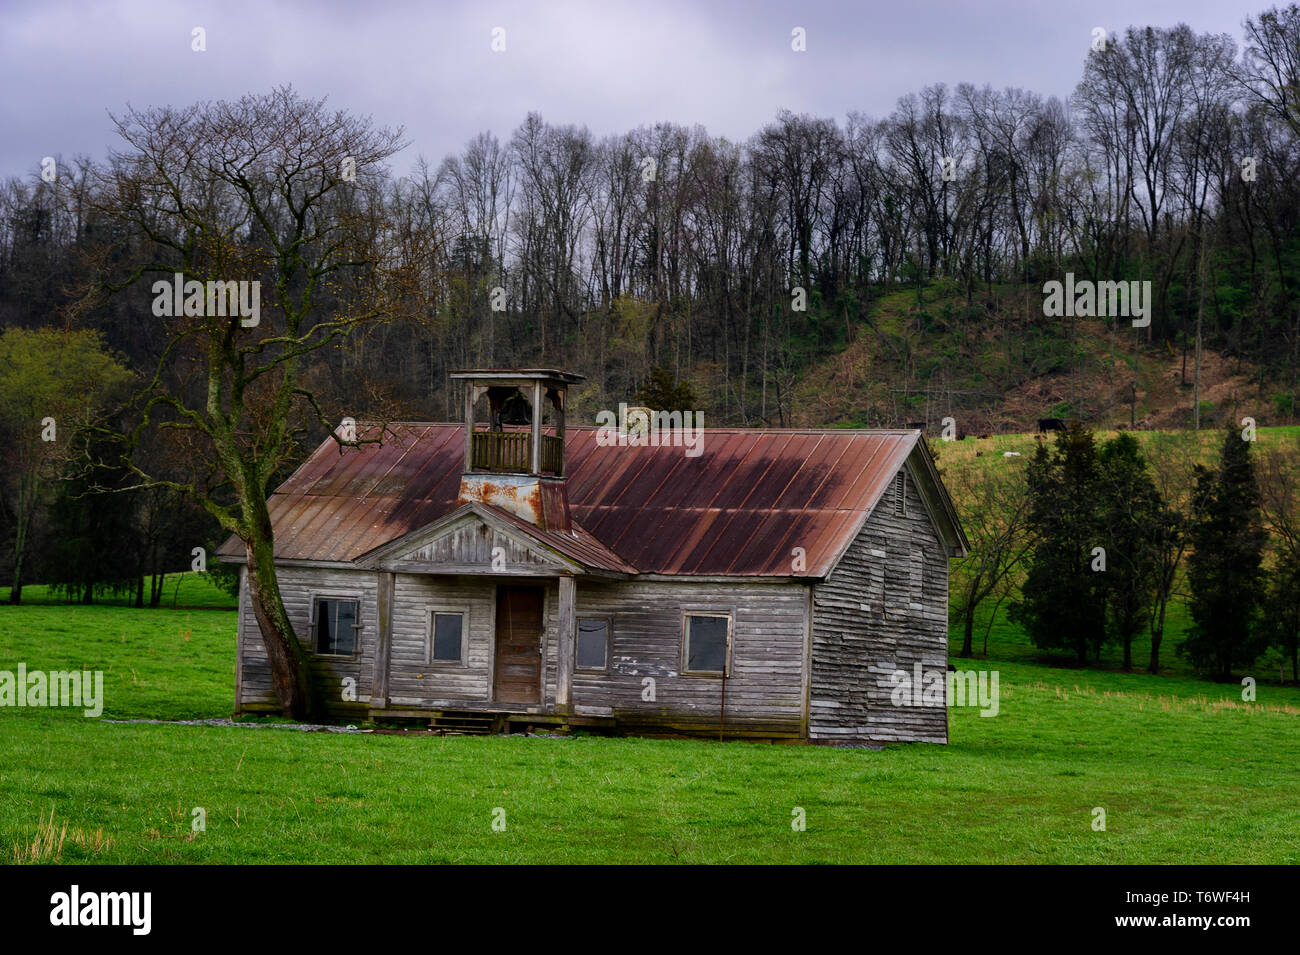 Decaying to the elements, an old school house sits abandonded in a pasture under cloudy skies with misty rain. Stock Photo